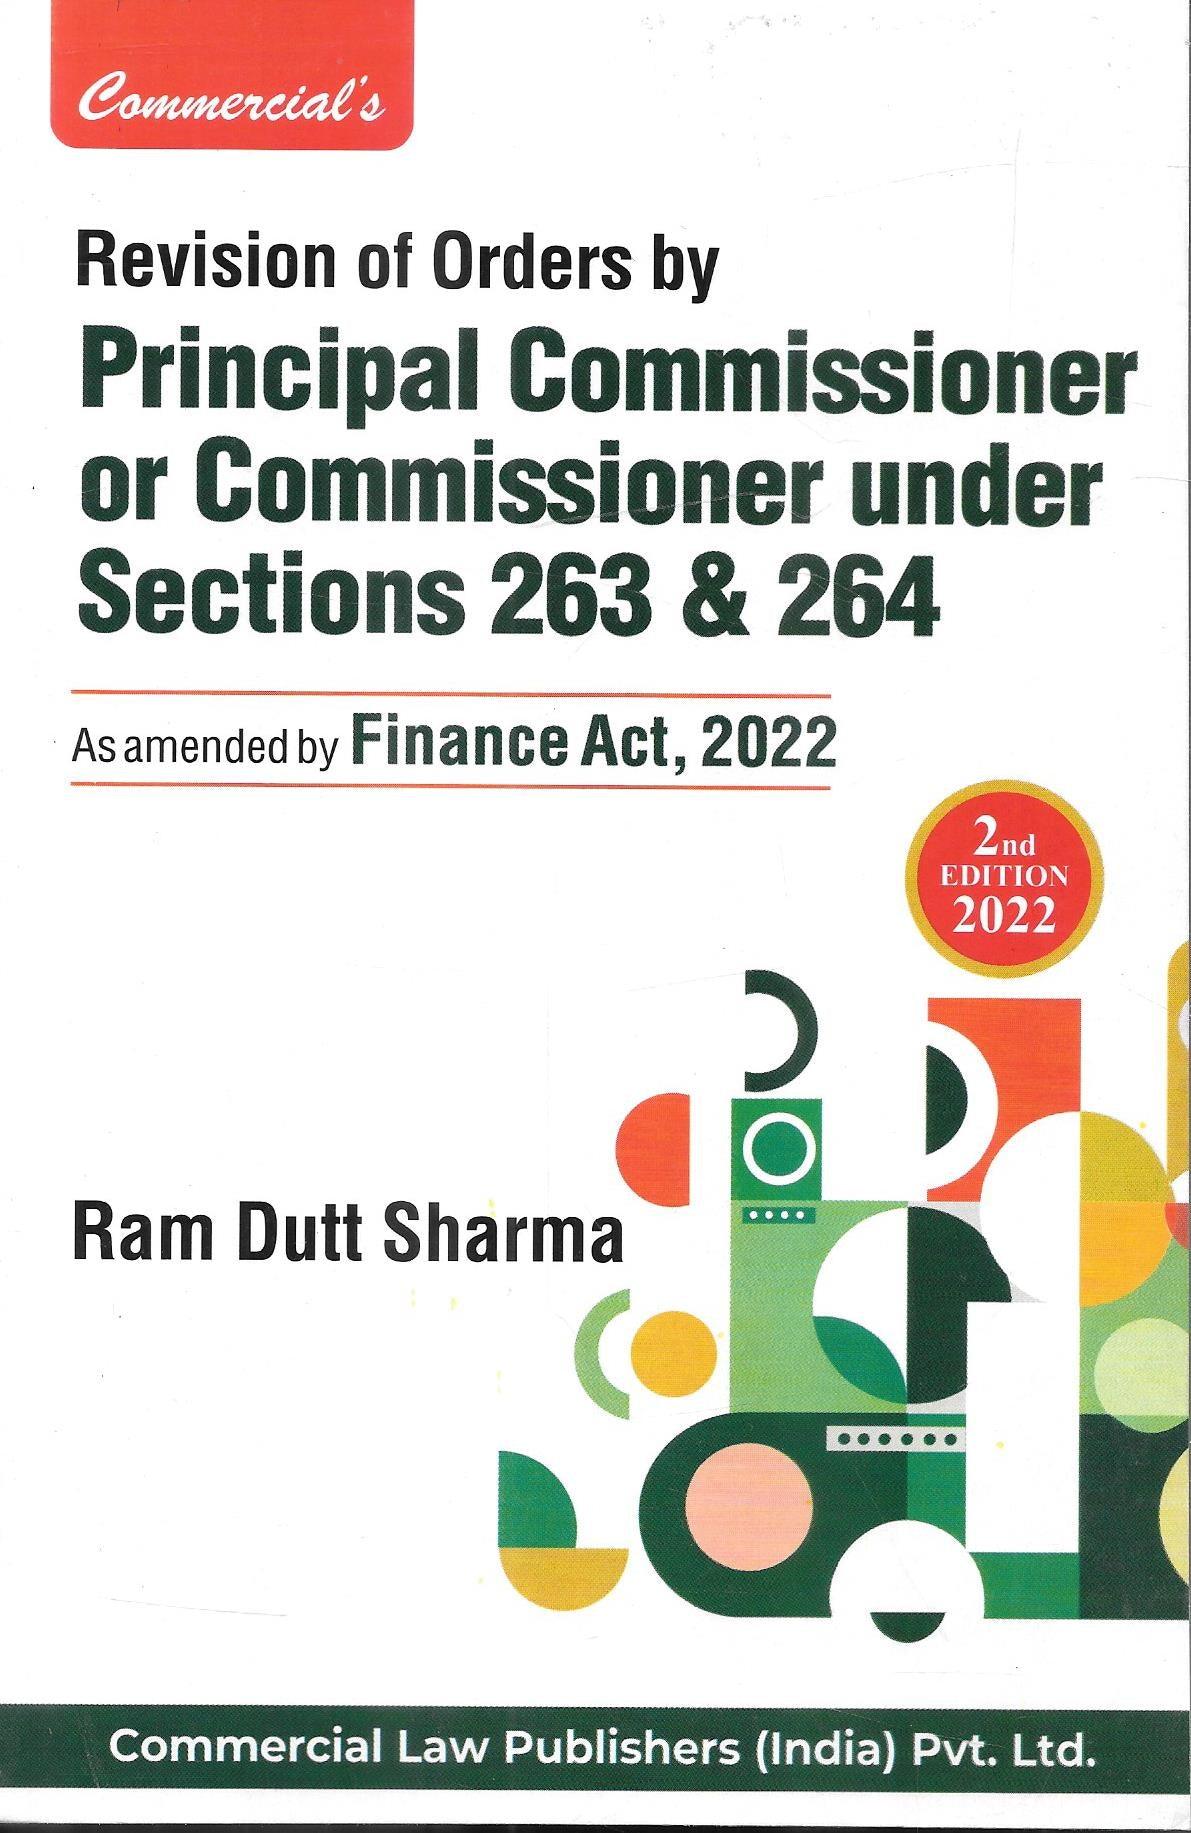 Revision of Order By Principal Commissioner or Commissioner under section 263 & section 264